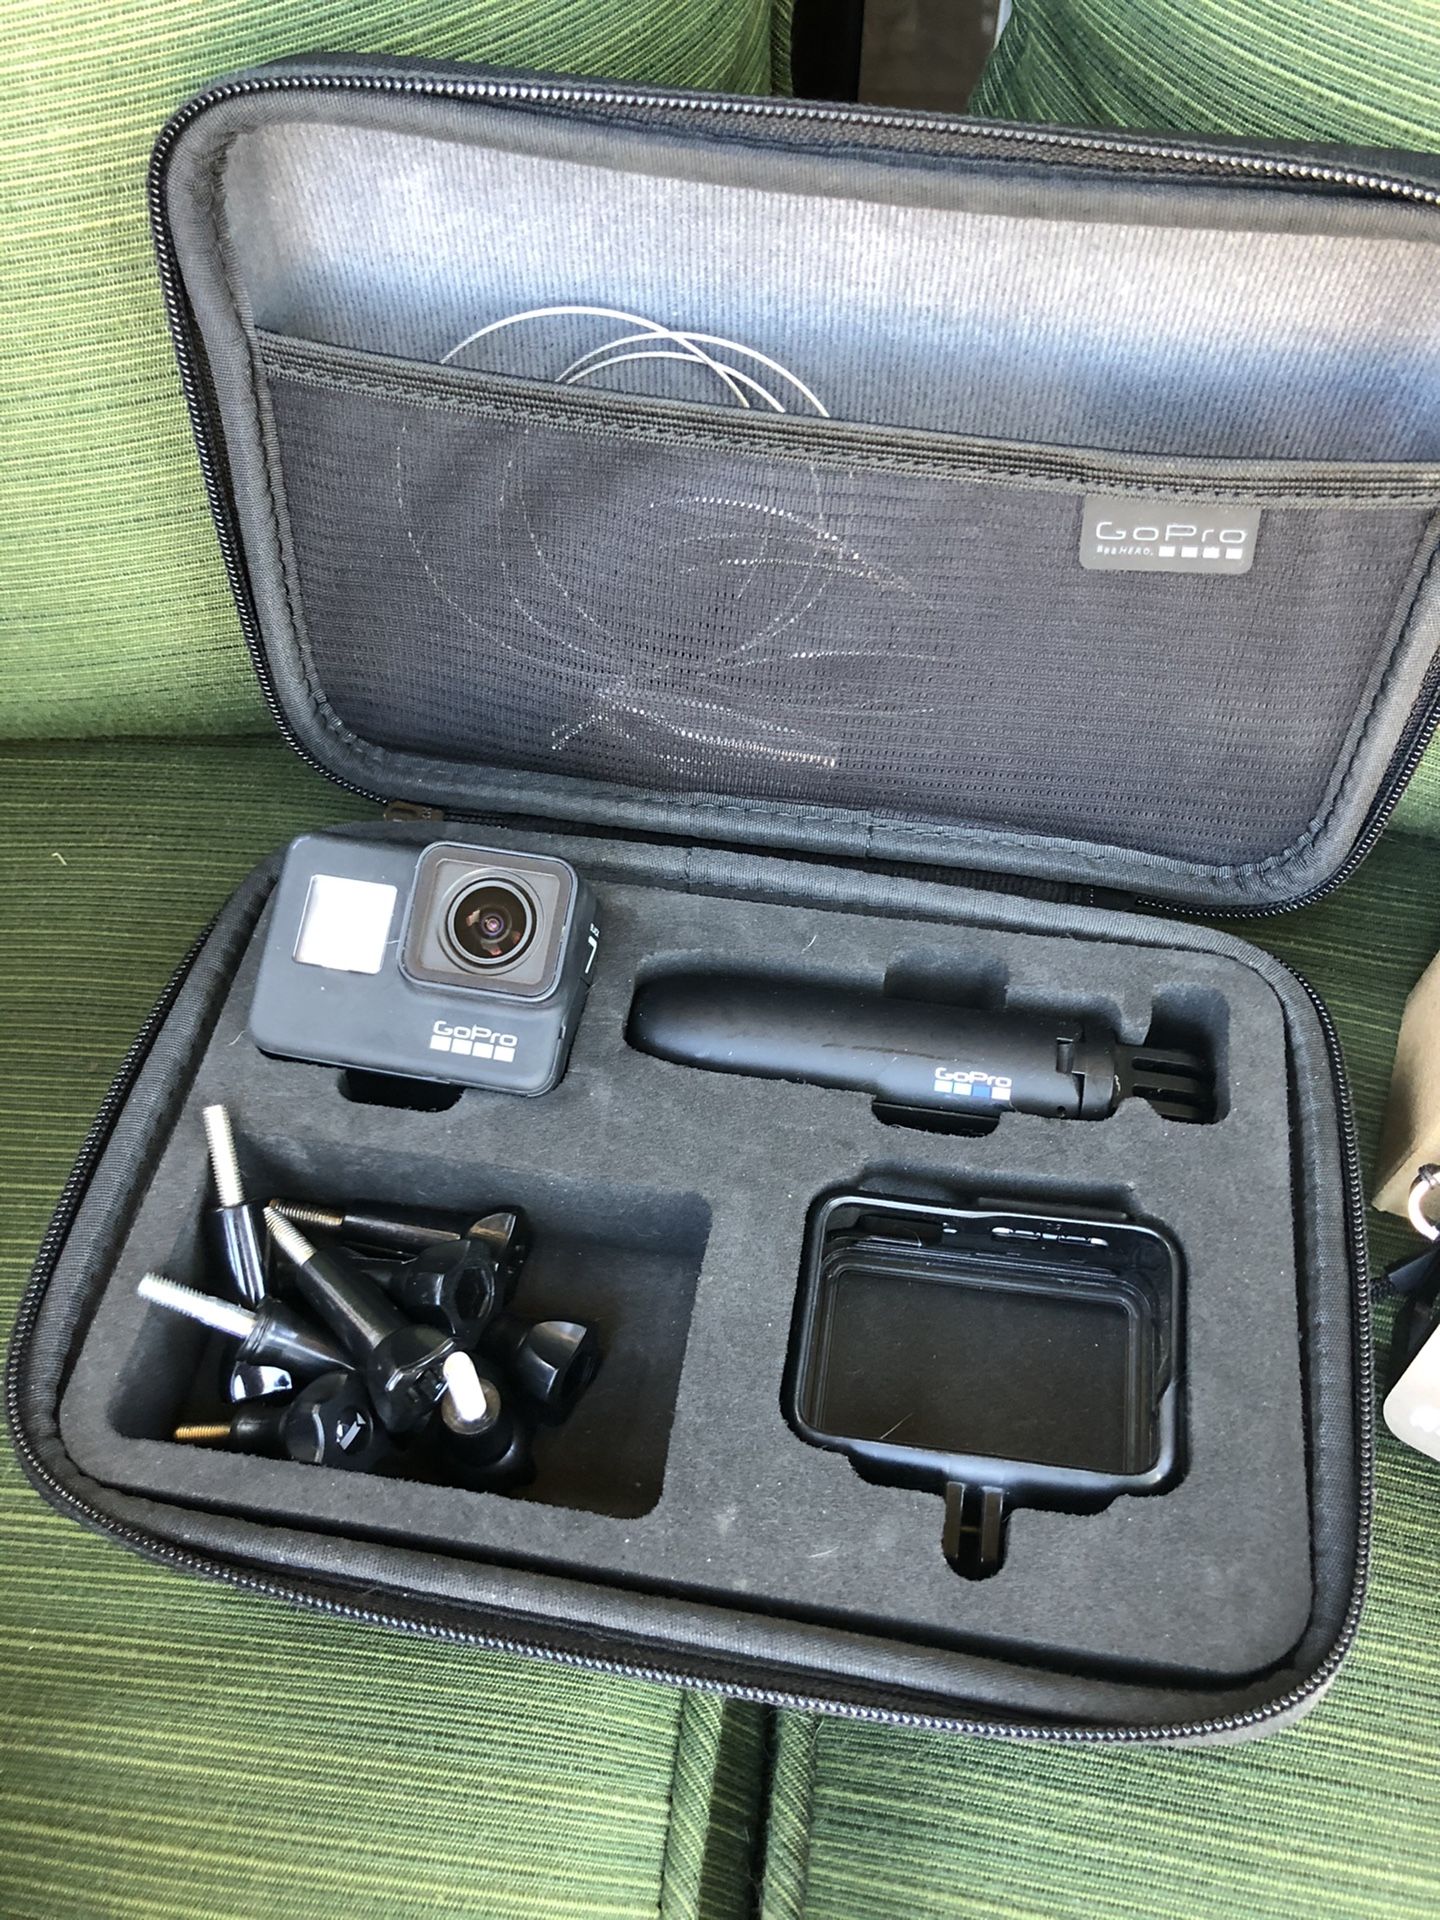 GoPro Hero 7 black edition and accessories